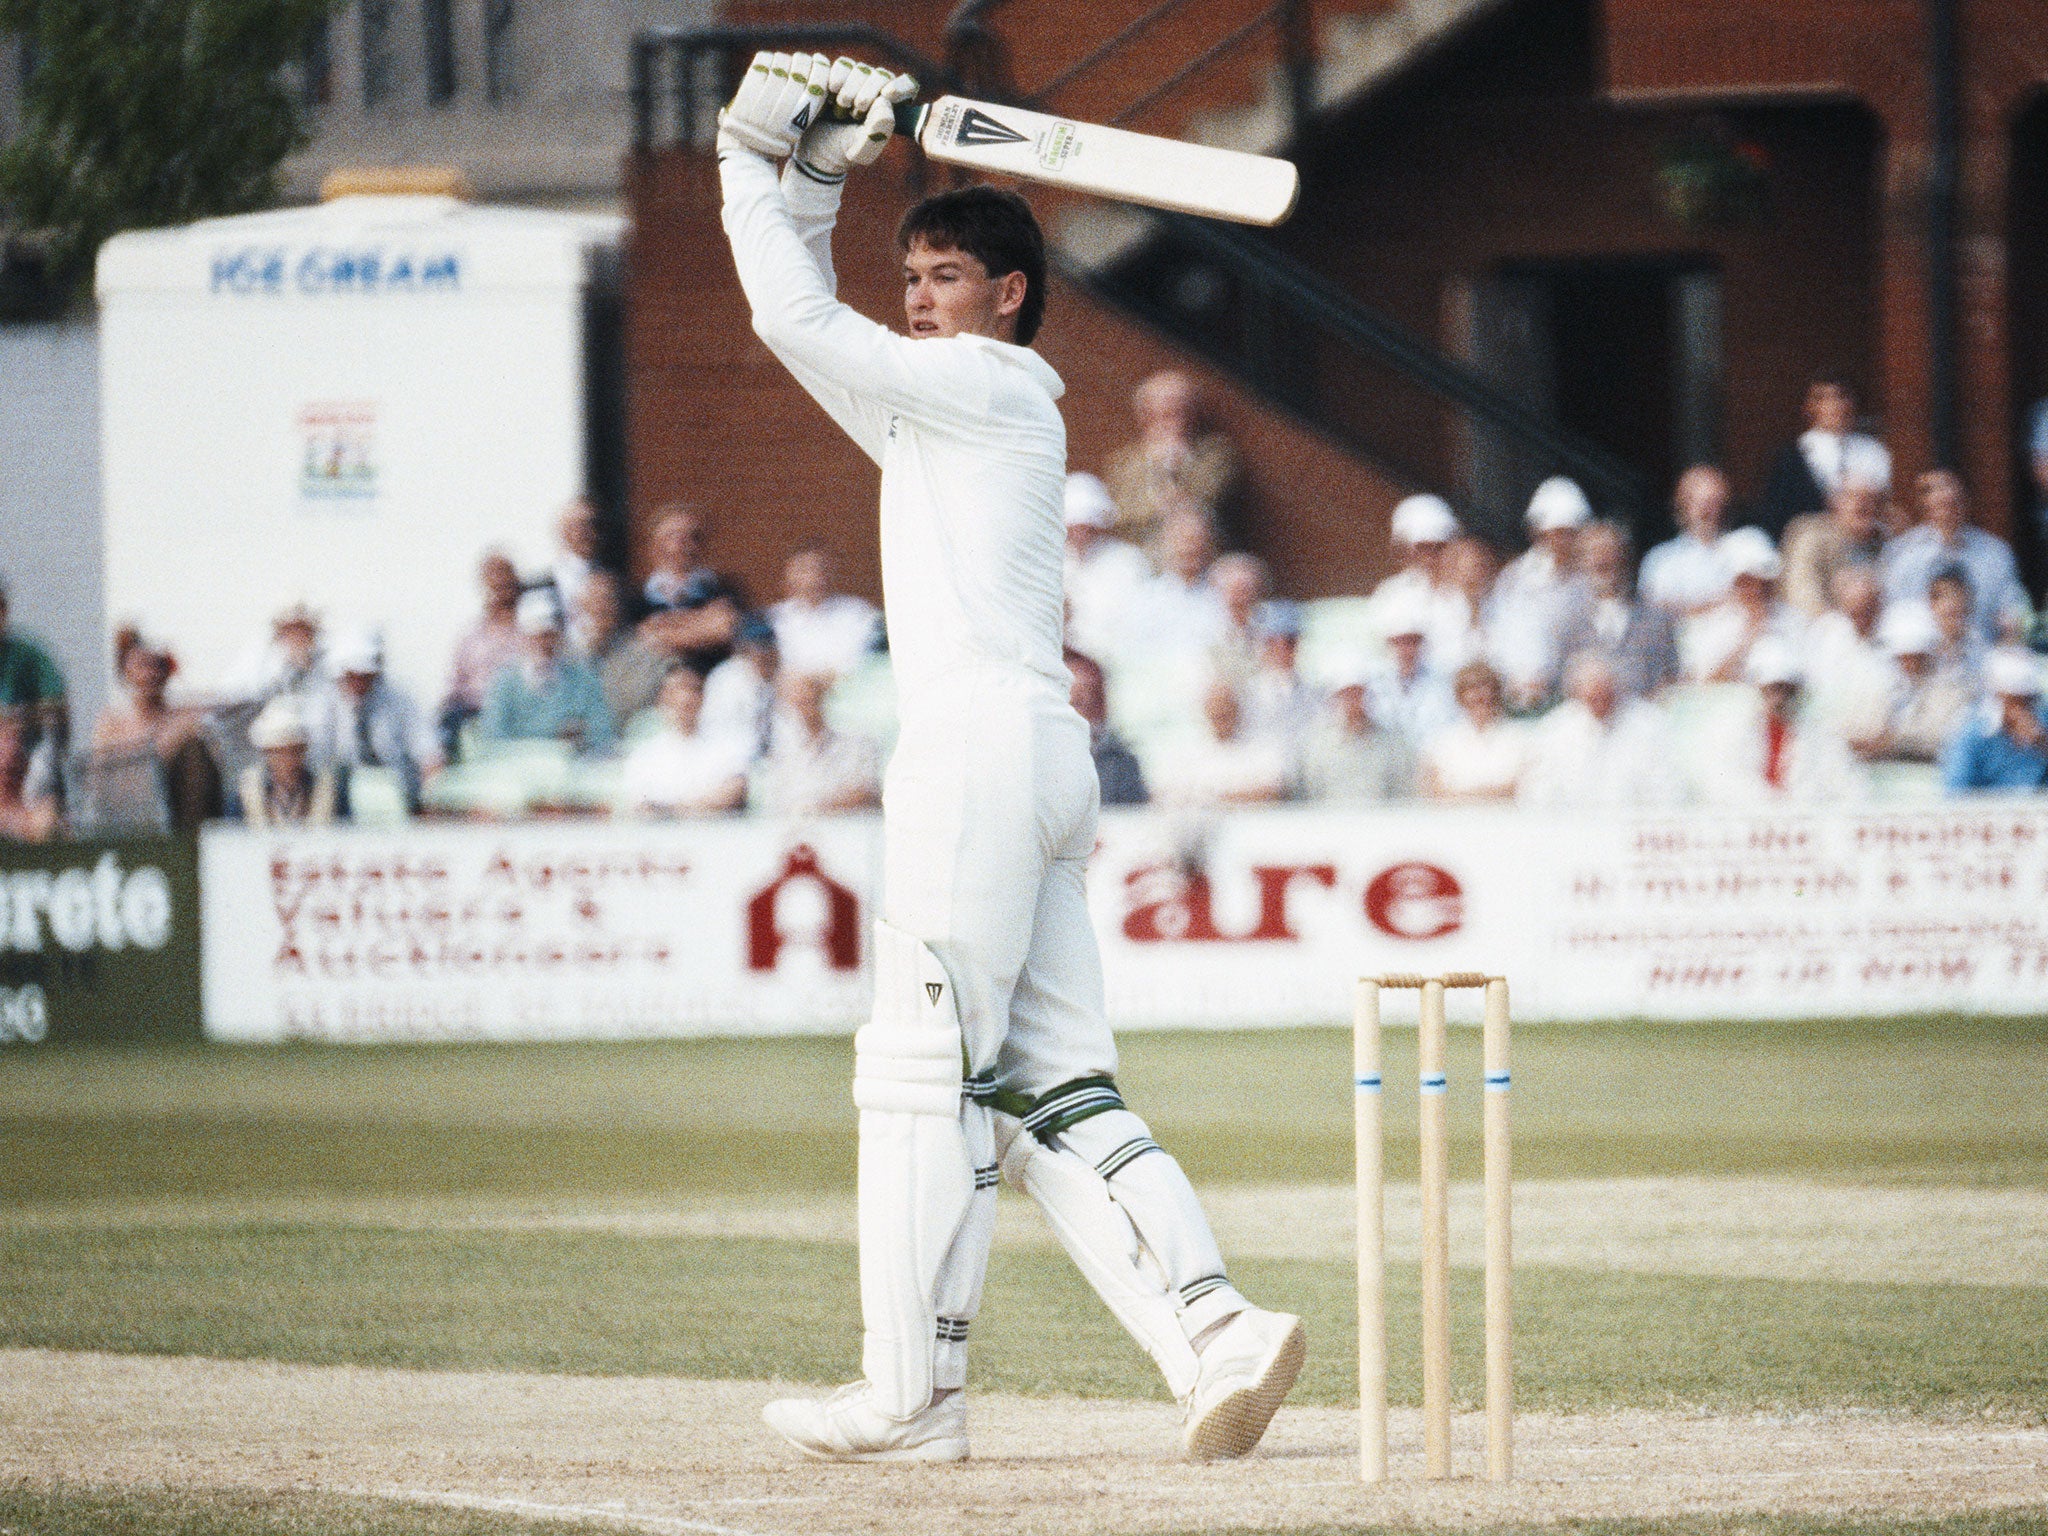 Hick's knock is still remembered today some 30 years on